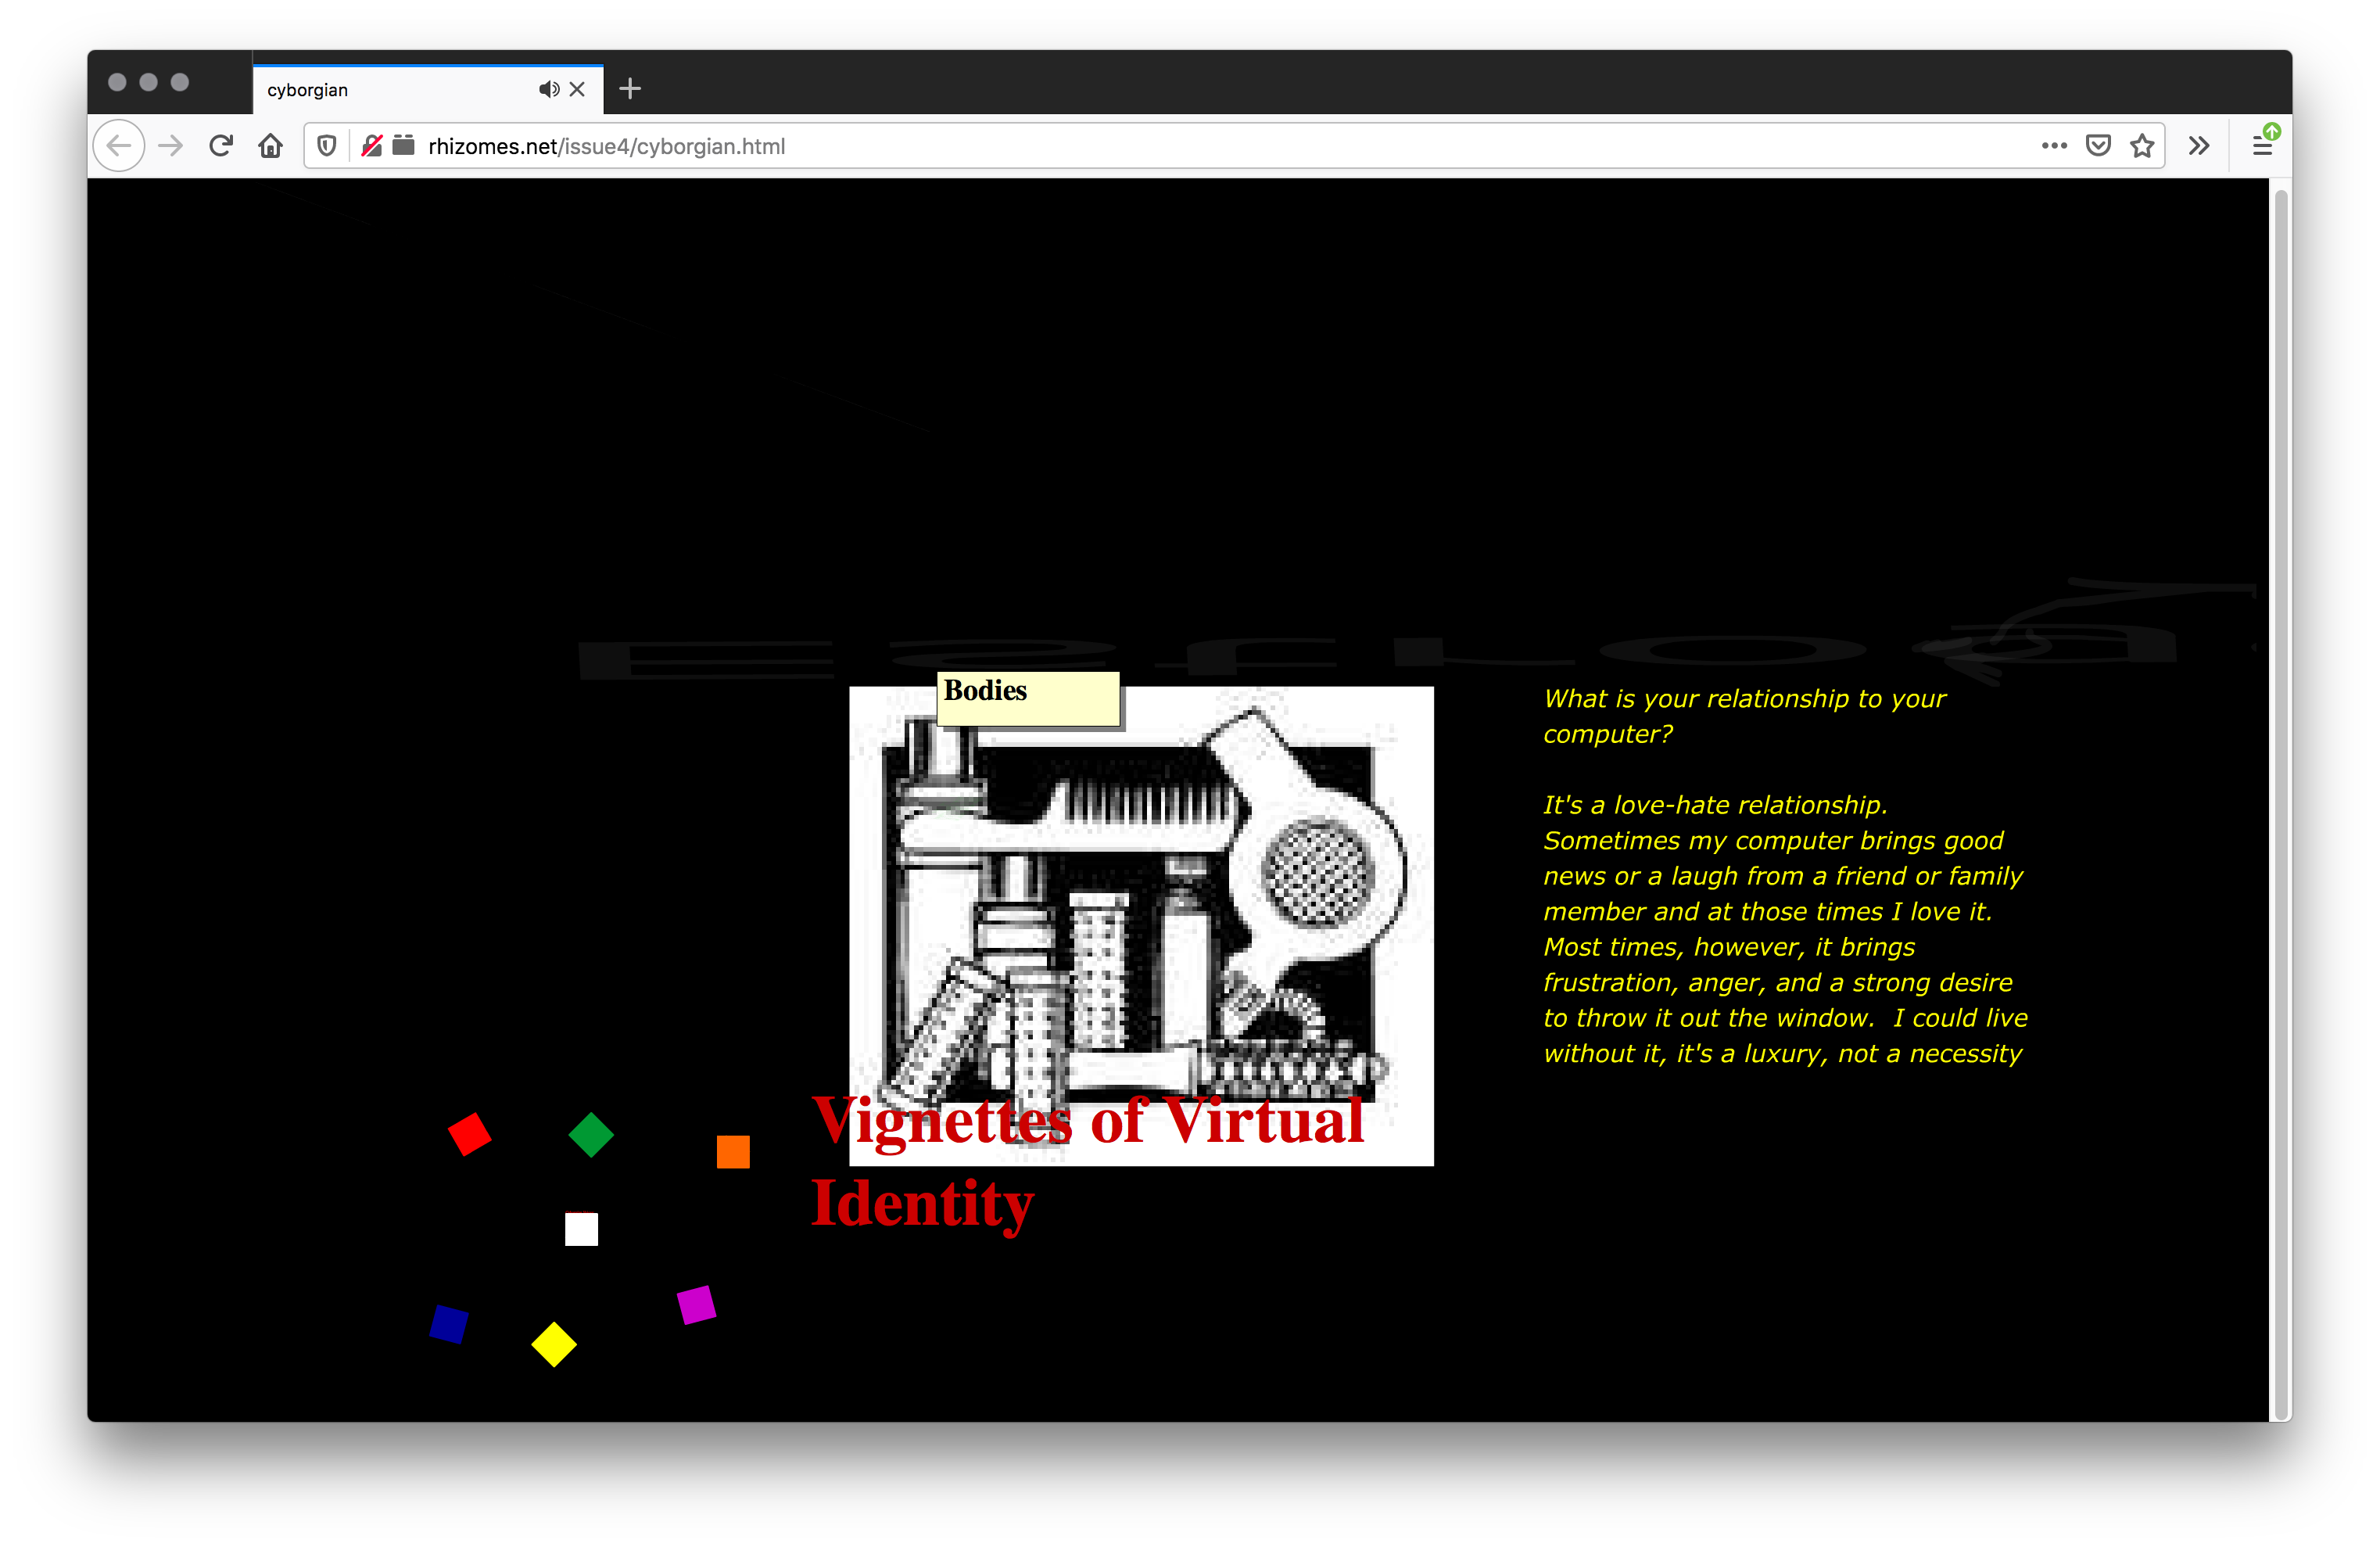 A black webpage with a graphic image of hair supplies such as a brush, rollers, a hair dryer, and a yellow tab that says "Bodies." Red text titles the image. To the right is yellow text. The bottom left has seven small colorful squares scattered.